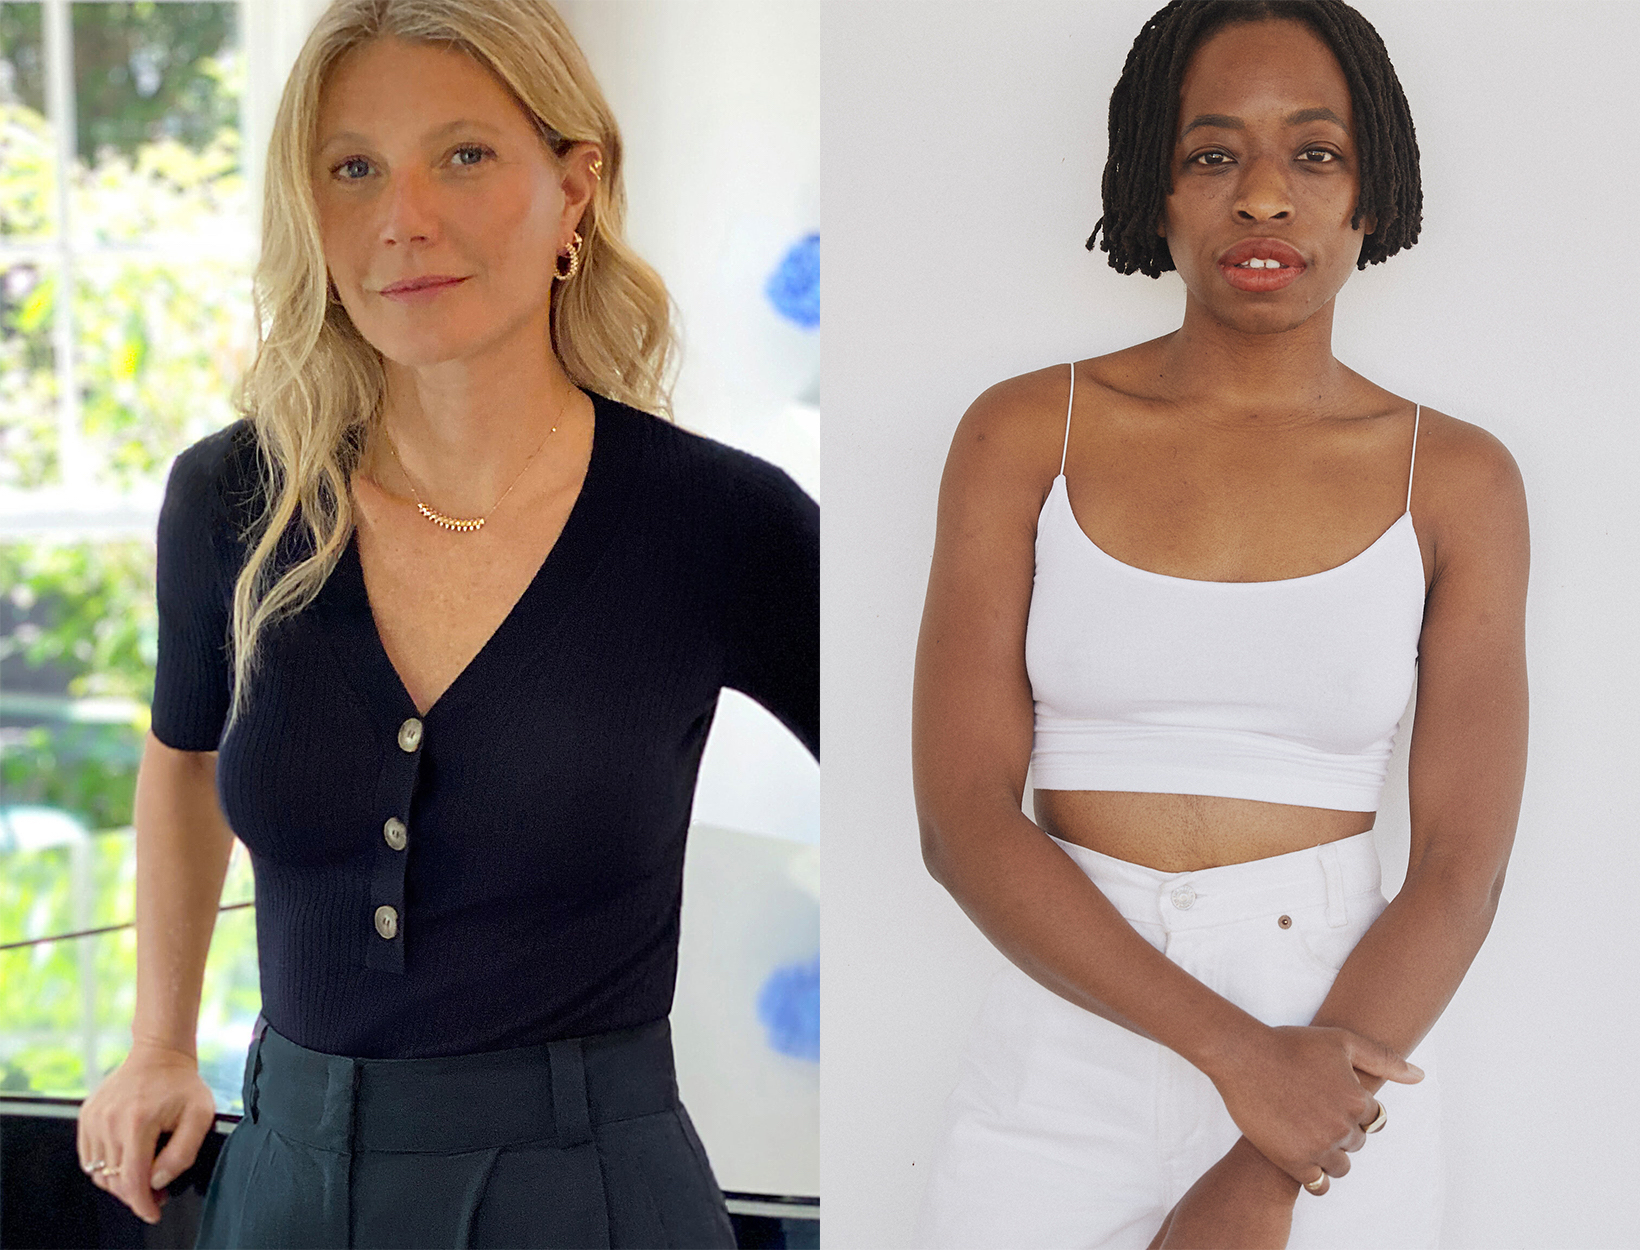 Chubby Teen Group - Gwyneth Paltrow x Erica Chidi: Skin-to-Skin Contact, Internal Family  Systems, and Other Things We're Into | goop